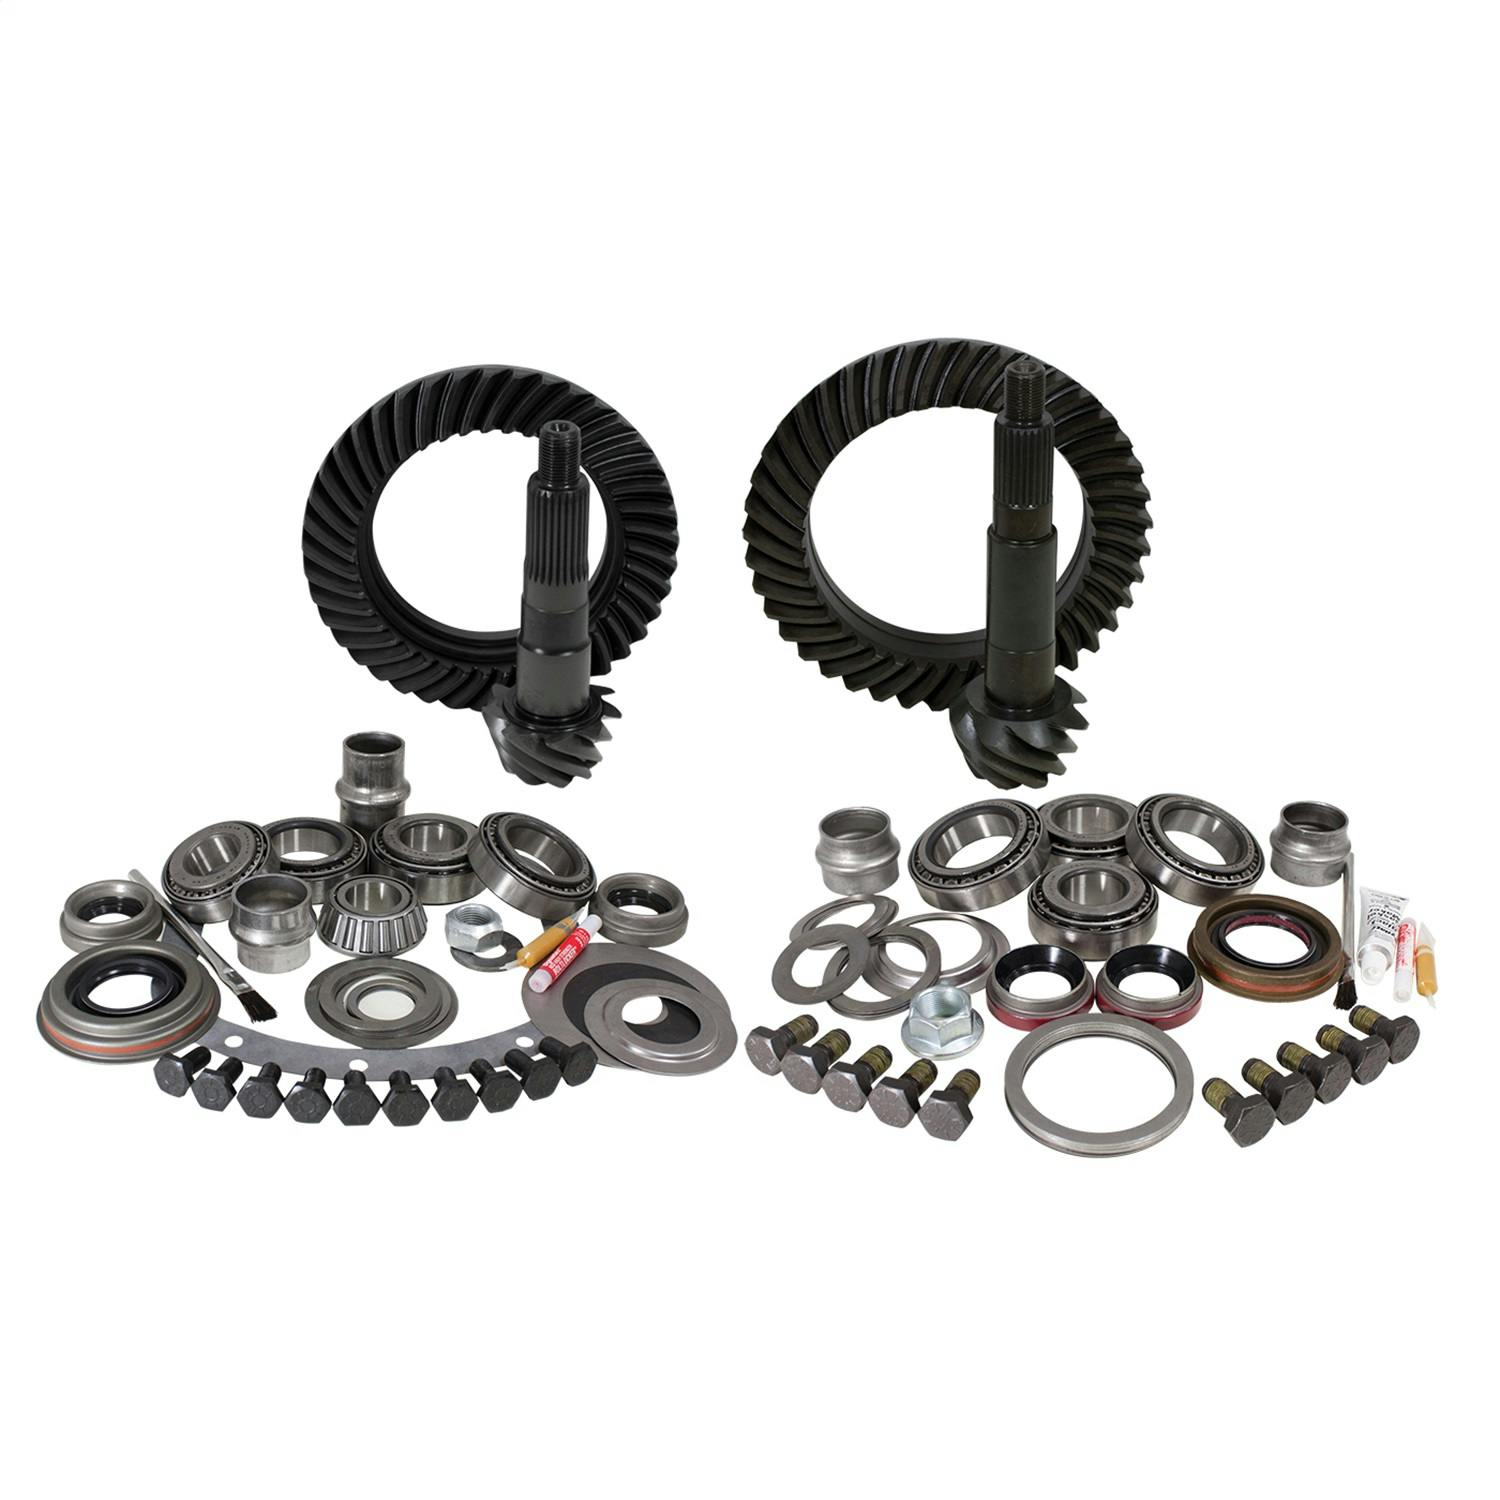 USA Standard Gear ZGK004 Ring And Pinion Set And Complete Install Kit